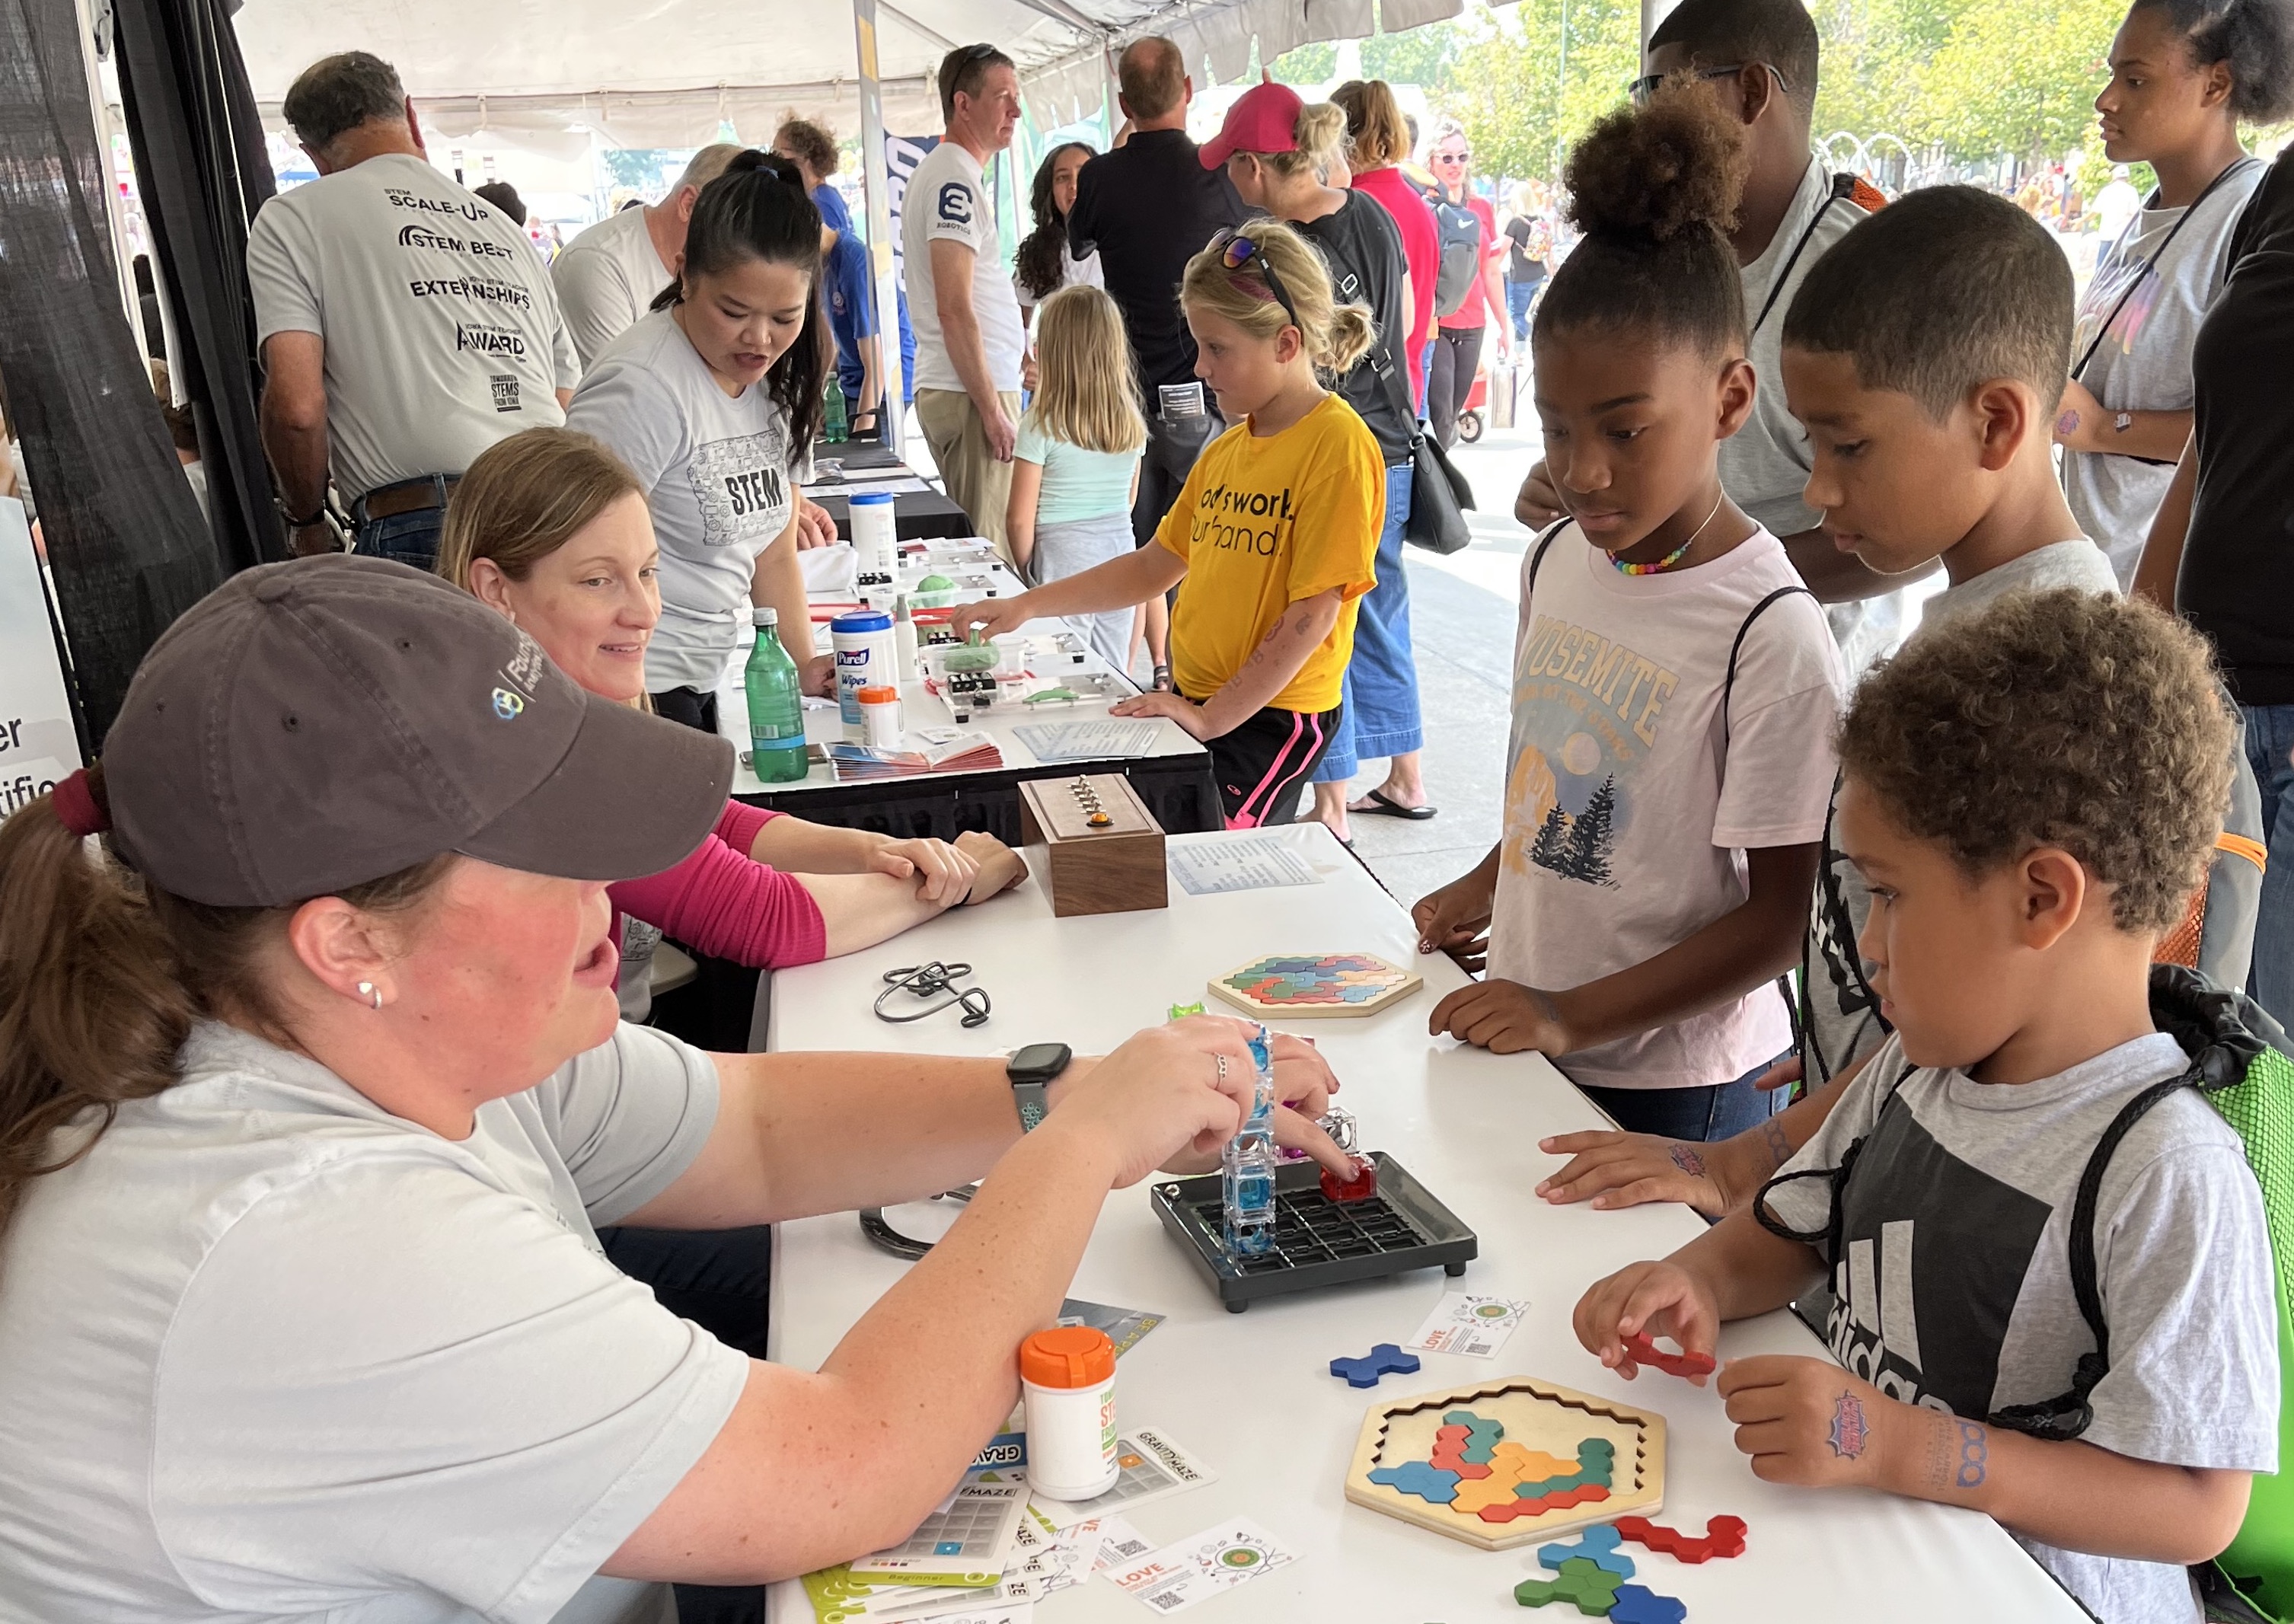 Iowa youth gain awareness and excitement for STEM through STEM Day at the Iowa State Fair, among other events and programs led by the STEM Council each year.